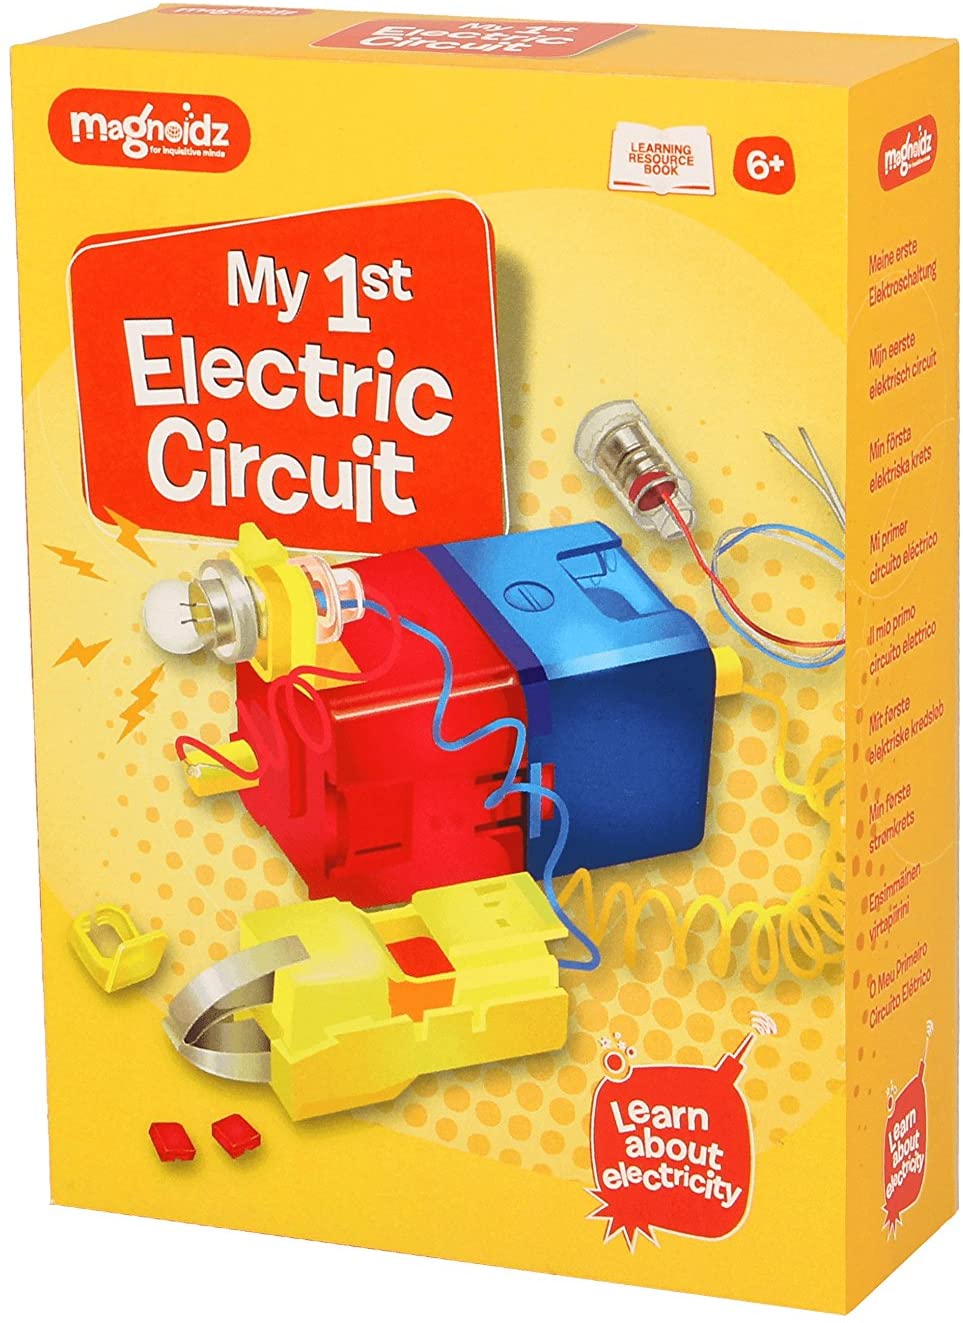 Magnoidz Labs My 1st Electric Circuit Science Kit The Bubble Room Toy Store Dublin